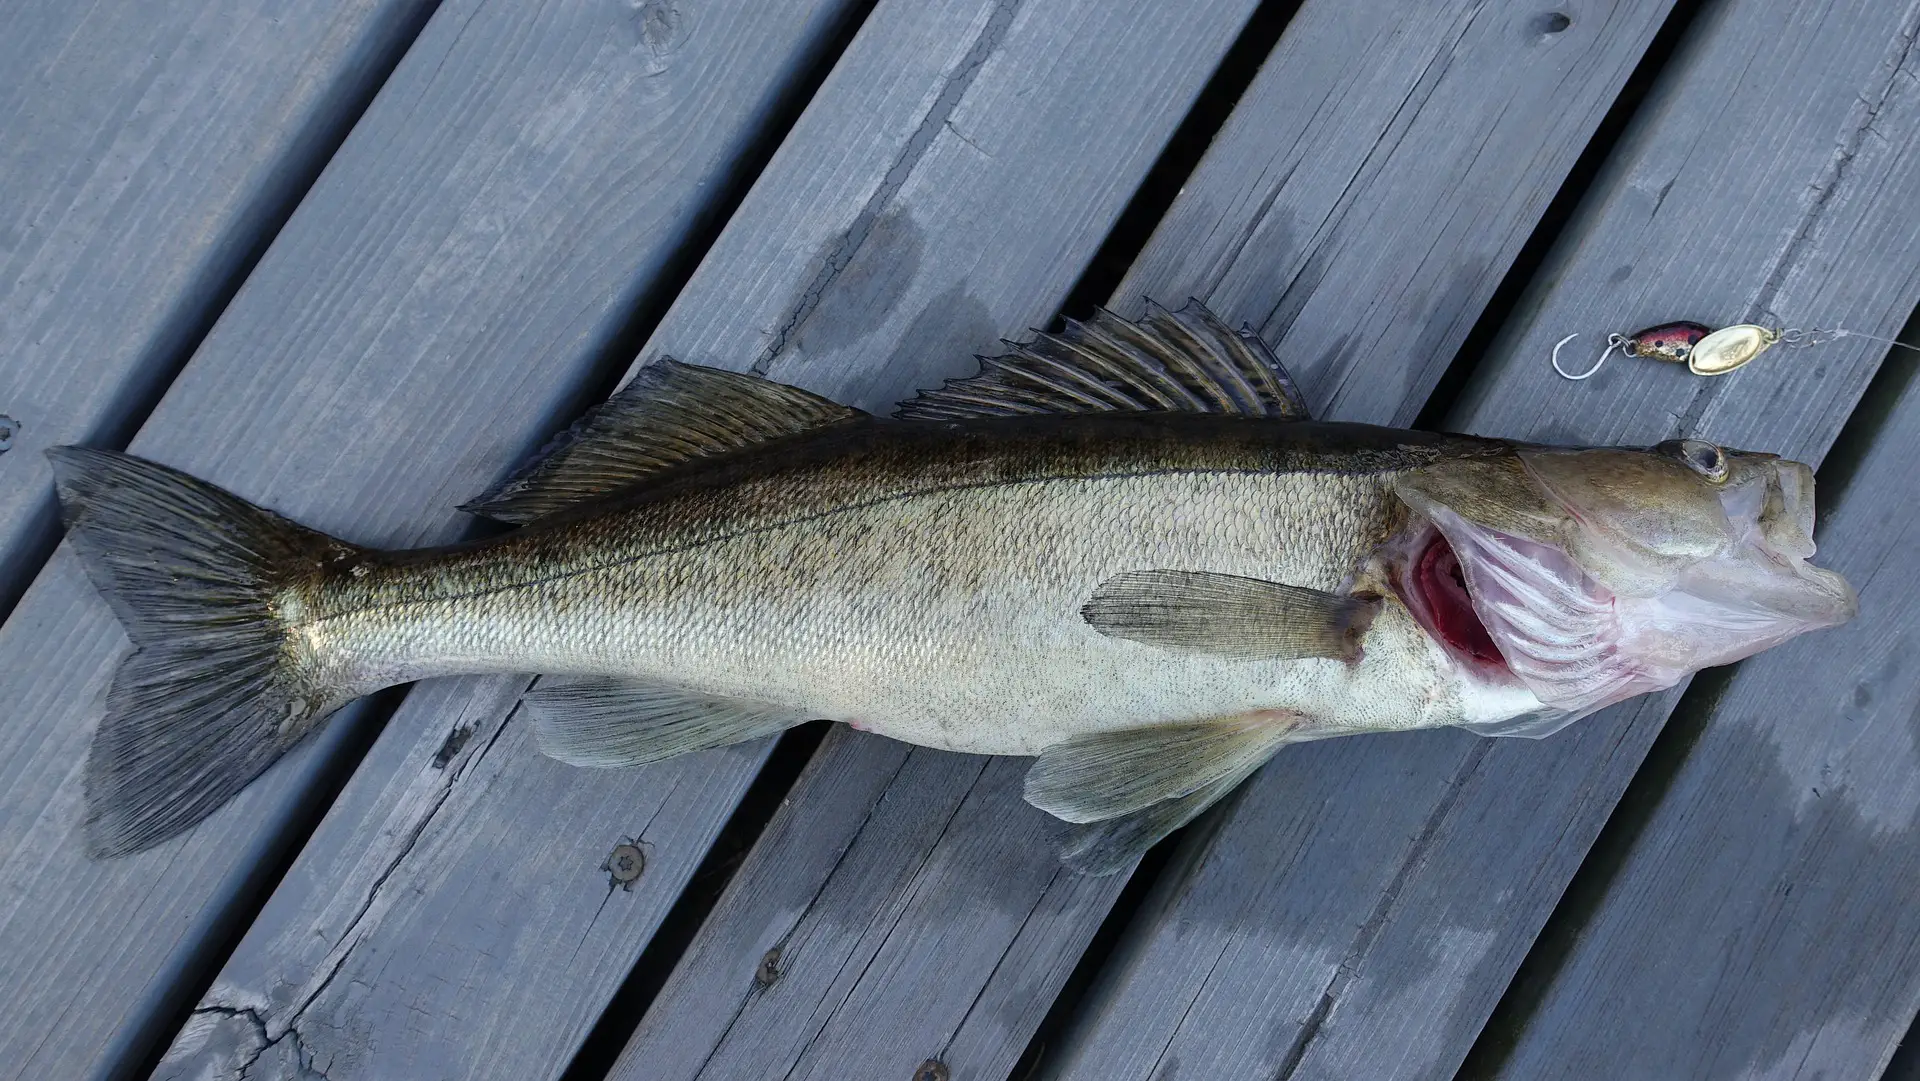 A freshly caught walleye laying on the dock caught by a fisherman